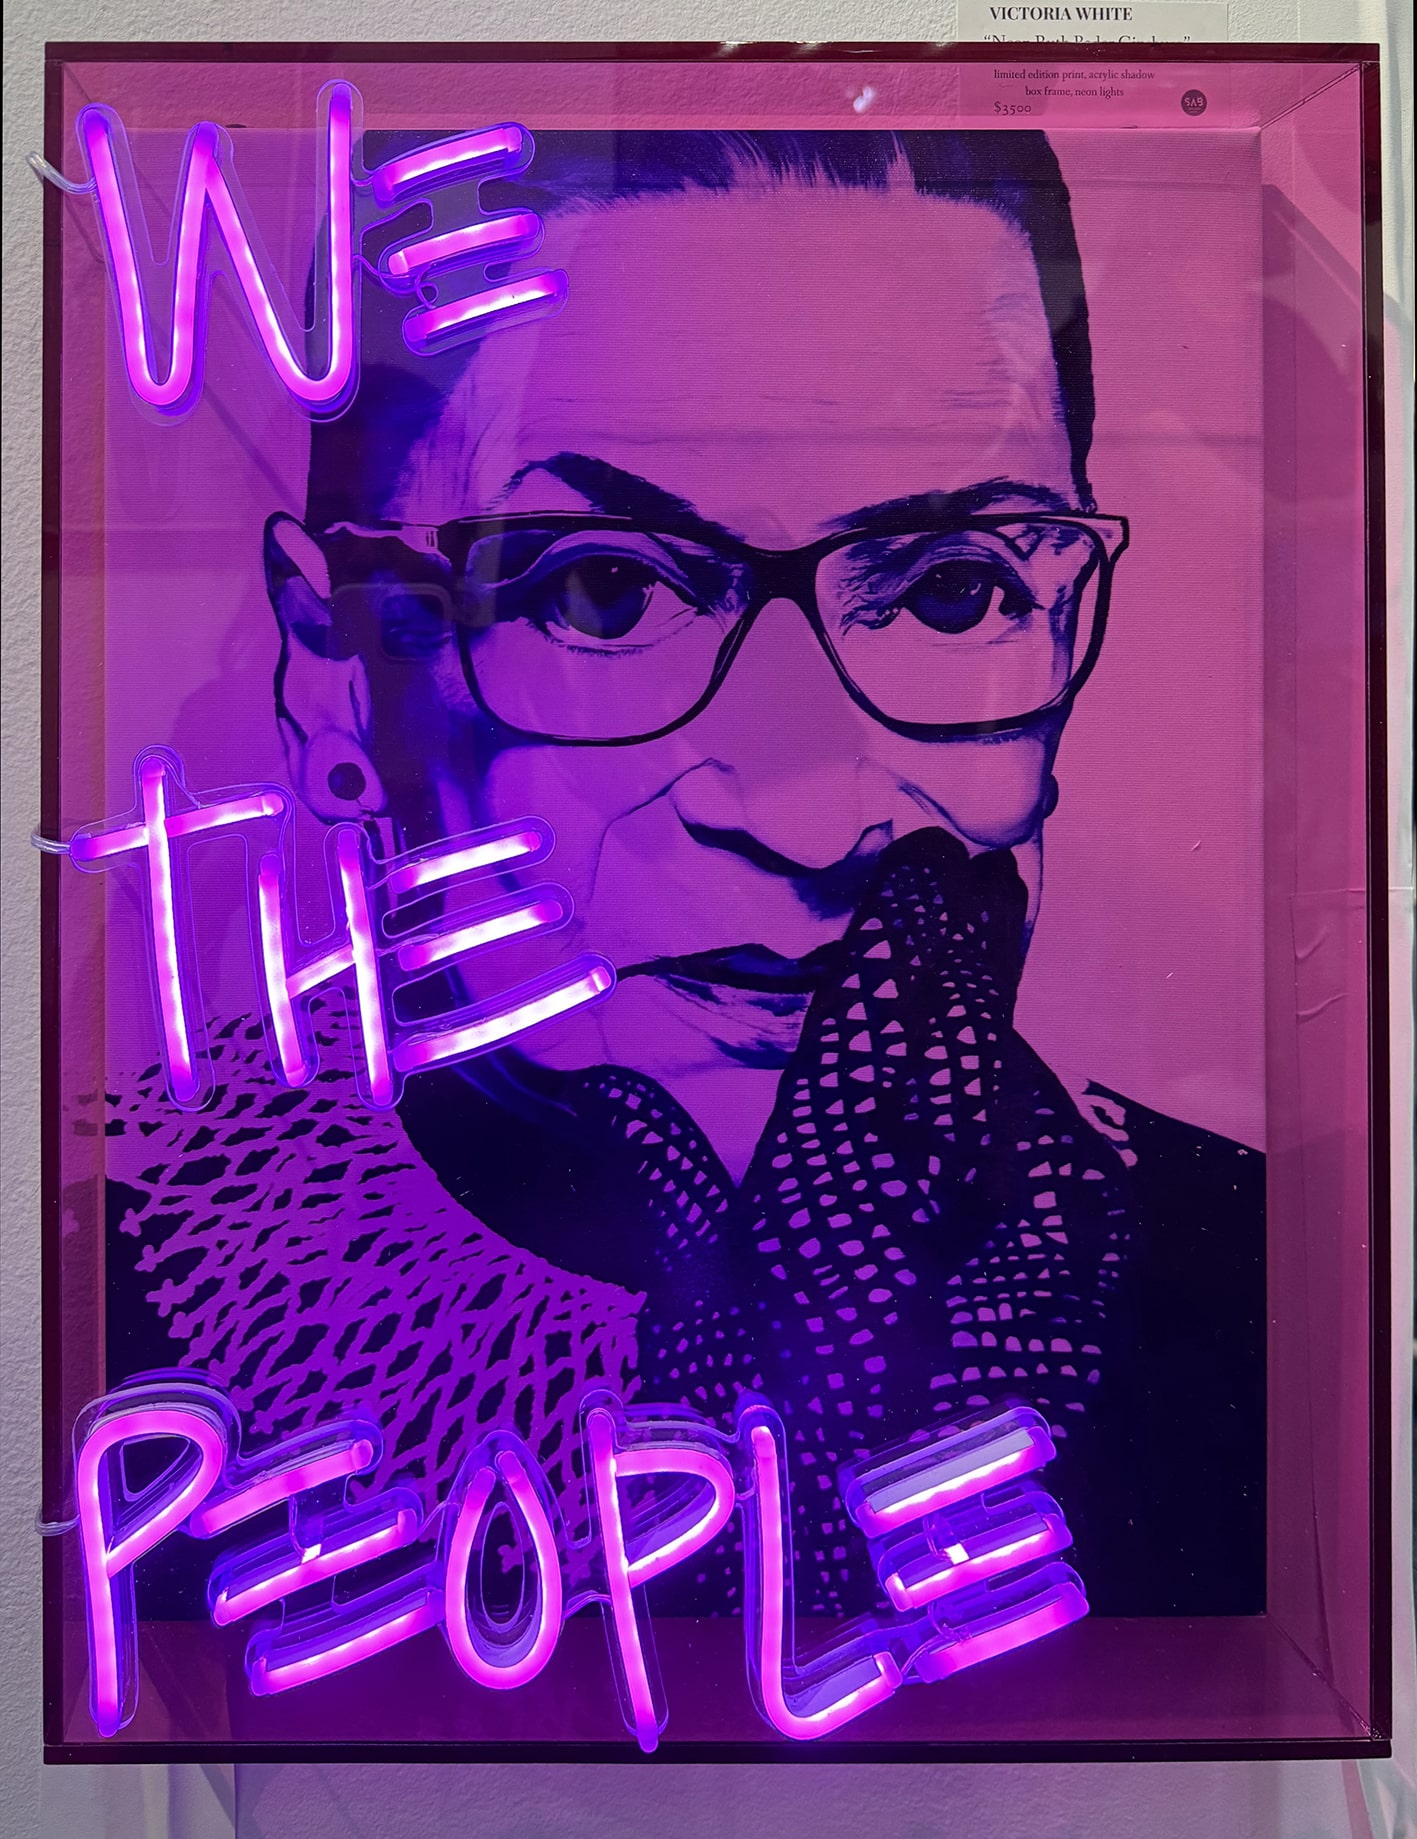 Neon Ruth Bader Ginsburg by Victoria White